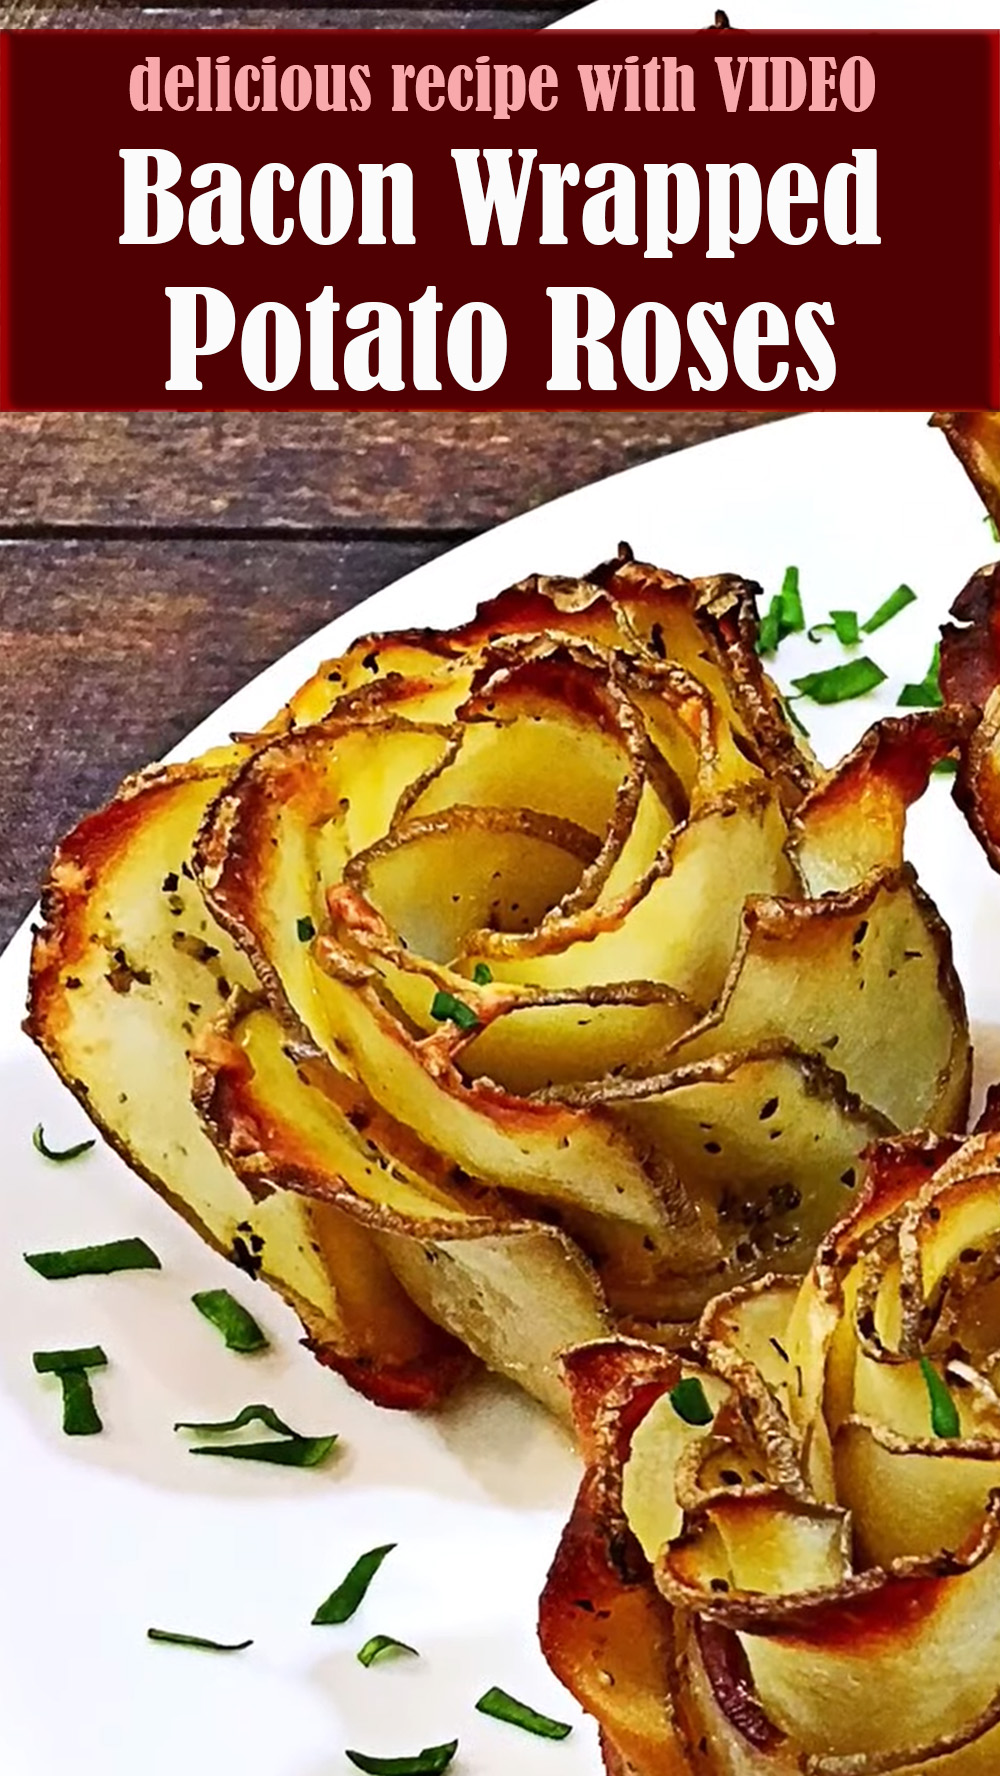 How to Make Bacon Wrapped Potato Roses